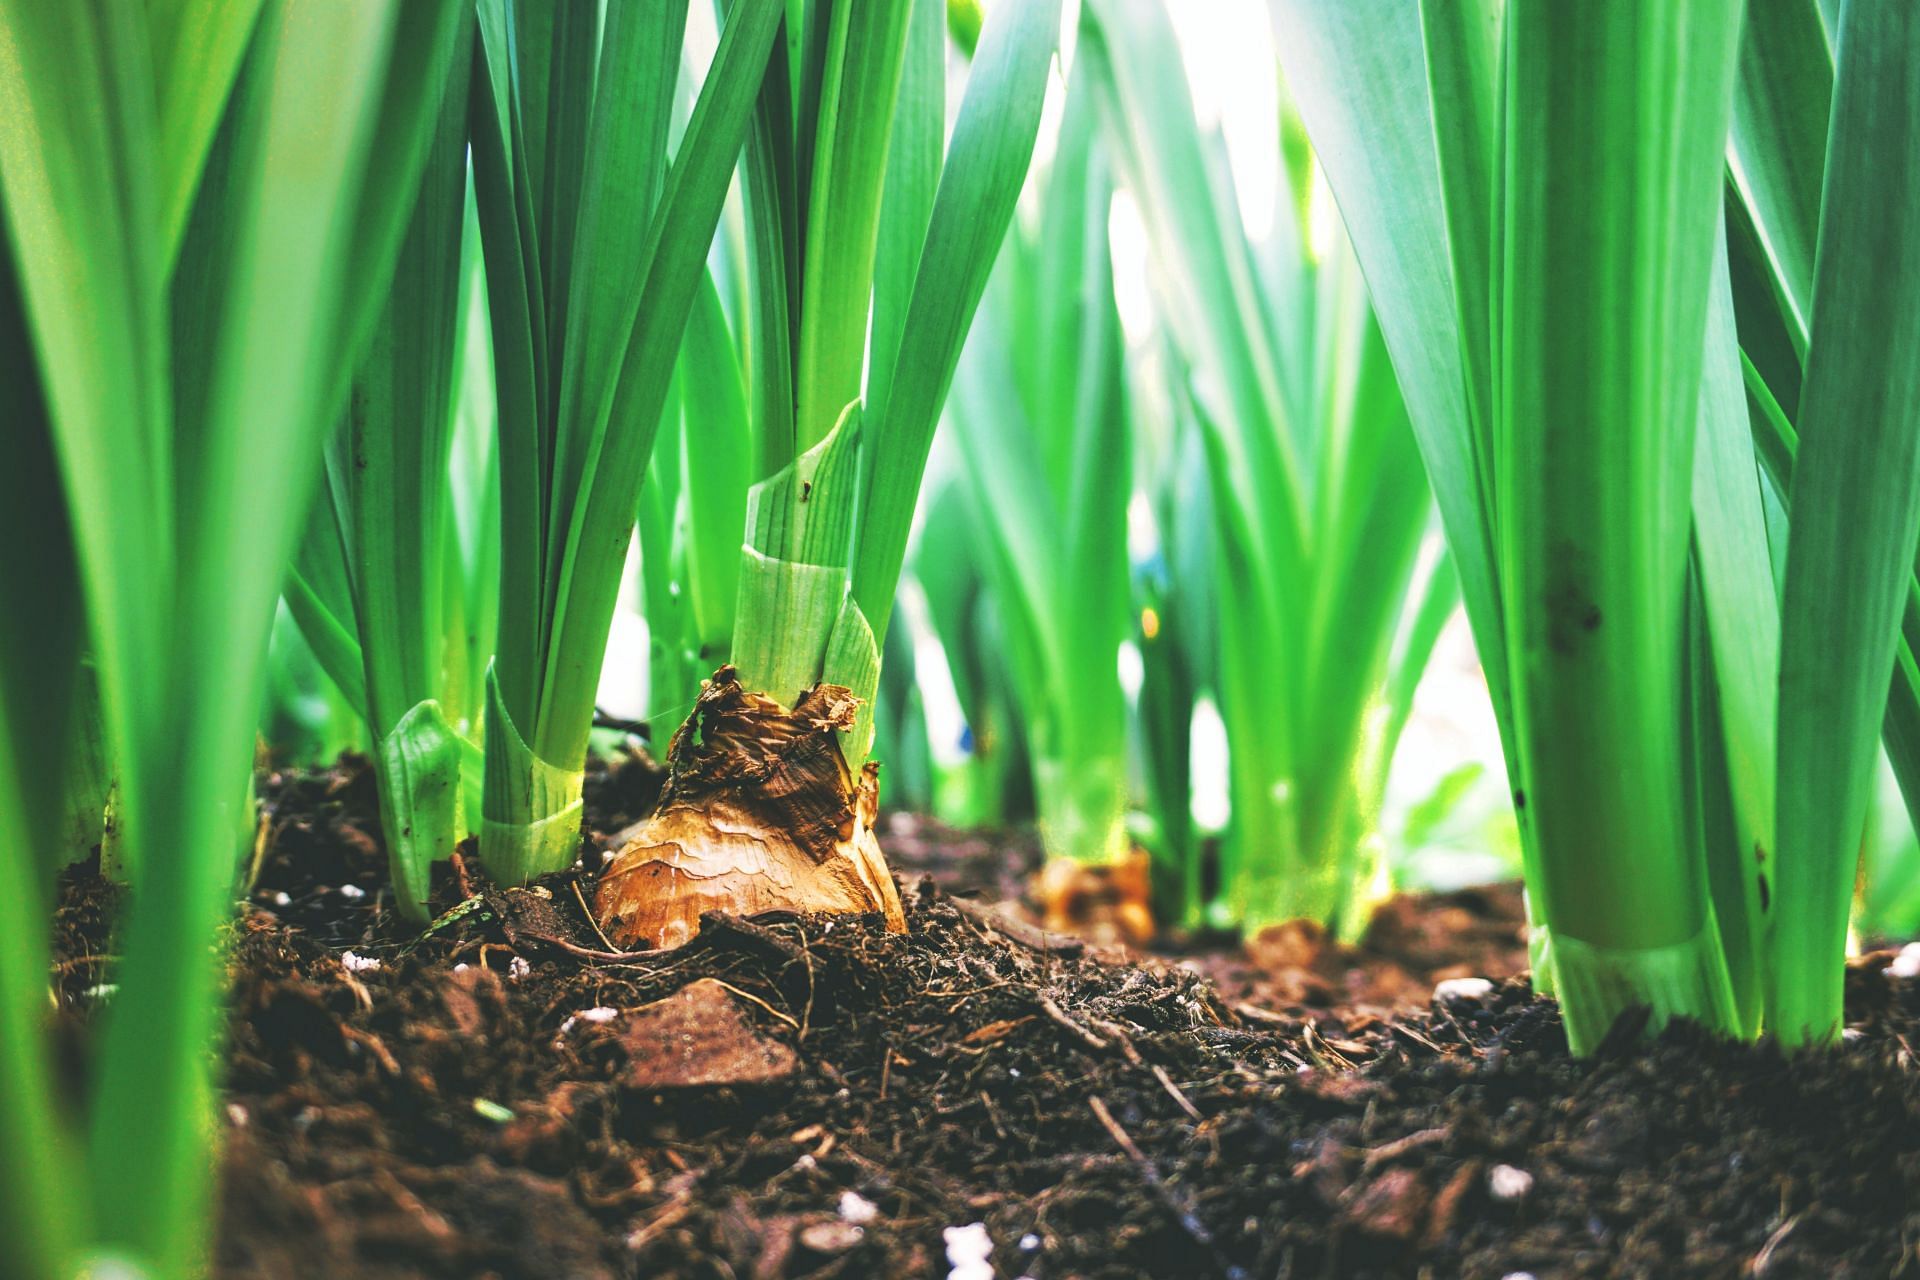 The main difference between scallions and green onions is their time of cultivation. (Image via Unsplash/Maarten Van Den Heuvel)